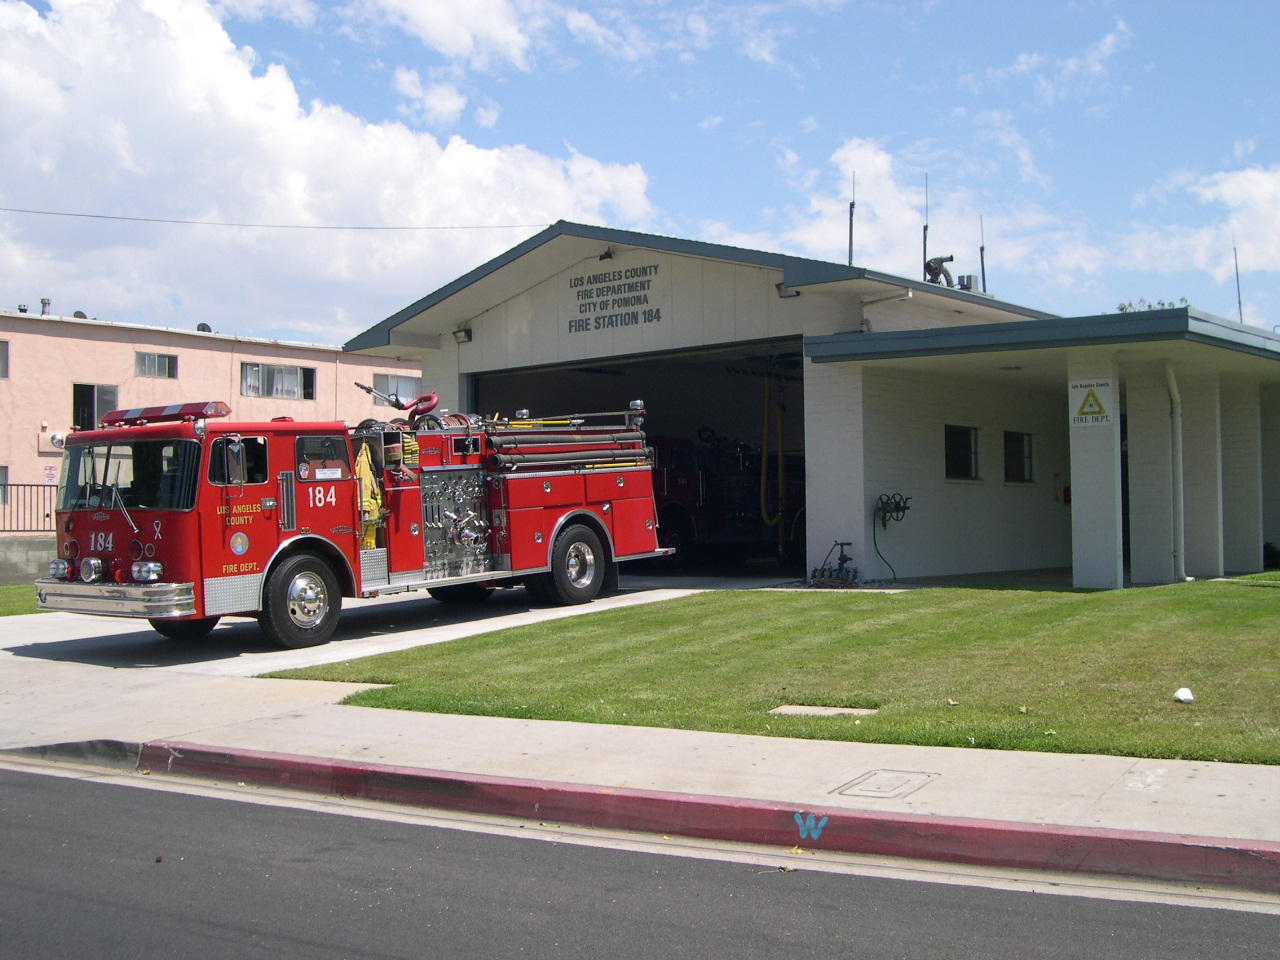 firetruck 184 parked outside of its 184 station. Beautiful grass and clear skies surround the truck